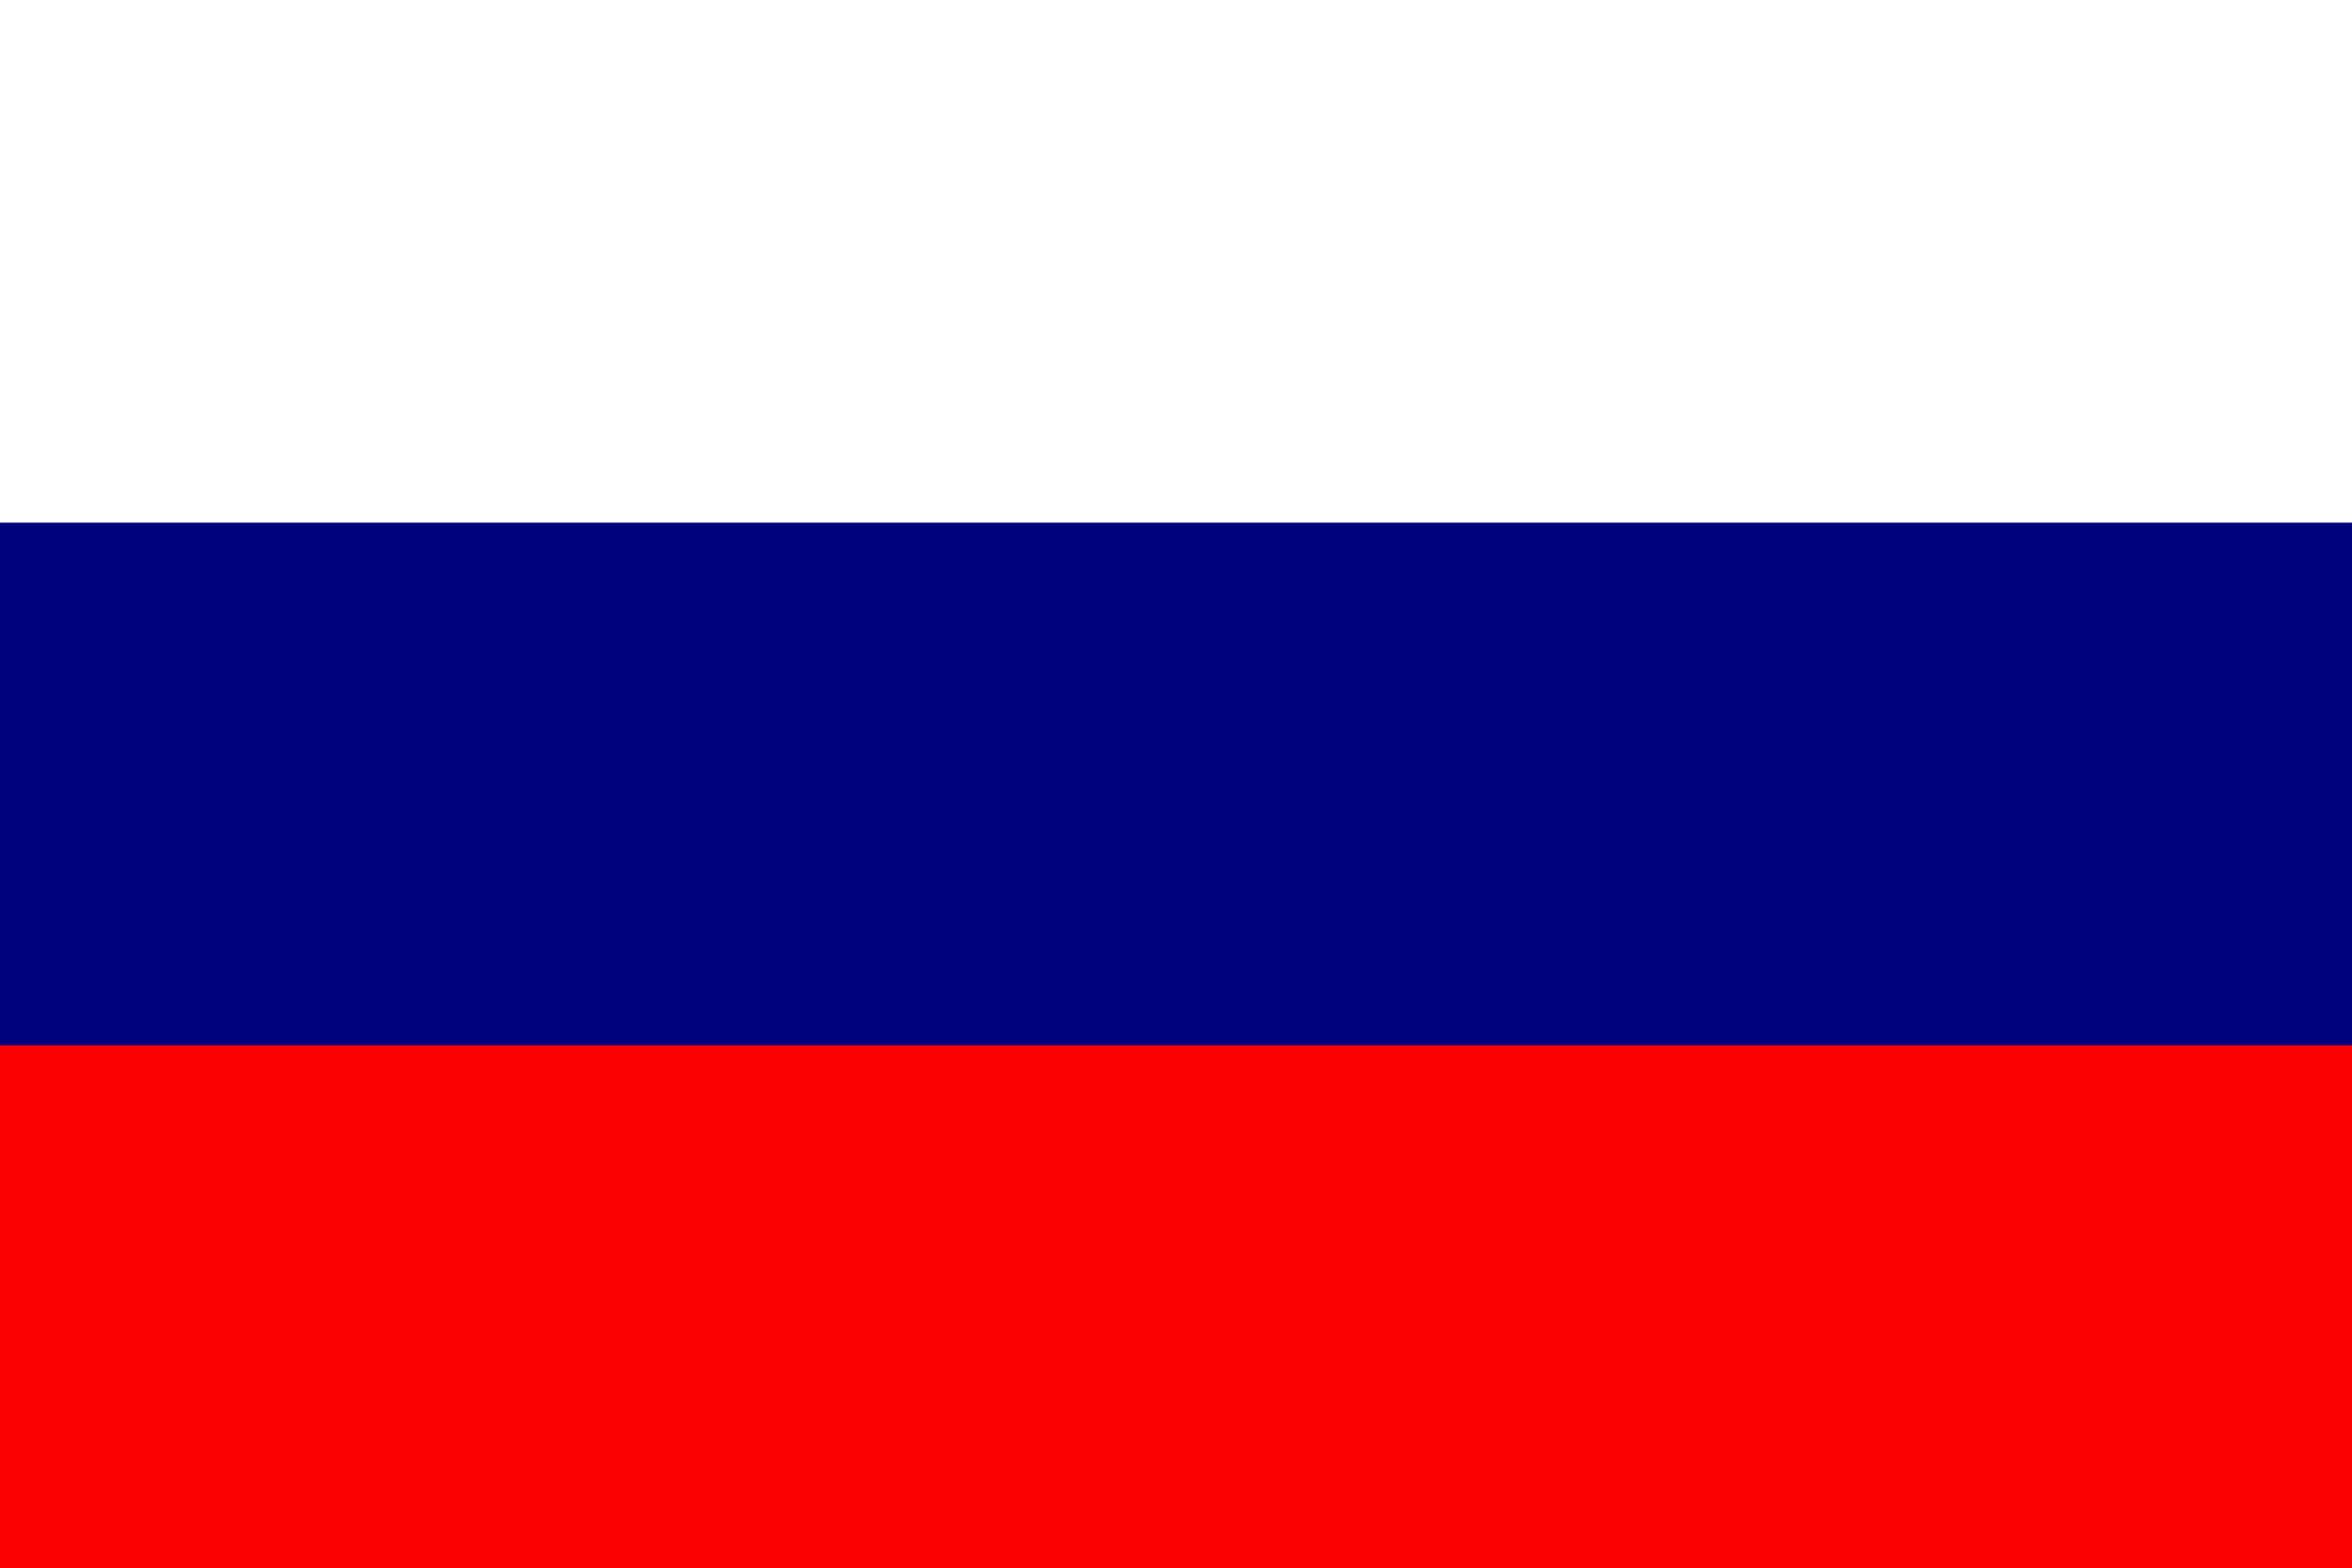 The Russian Federation 93